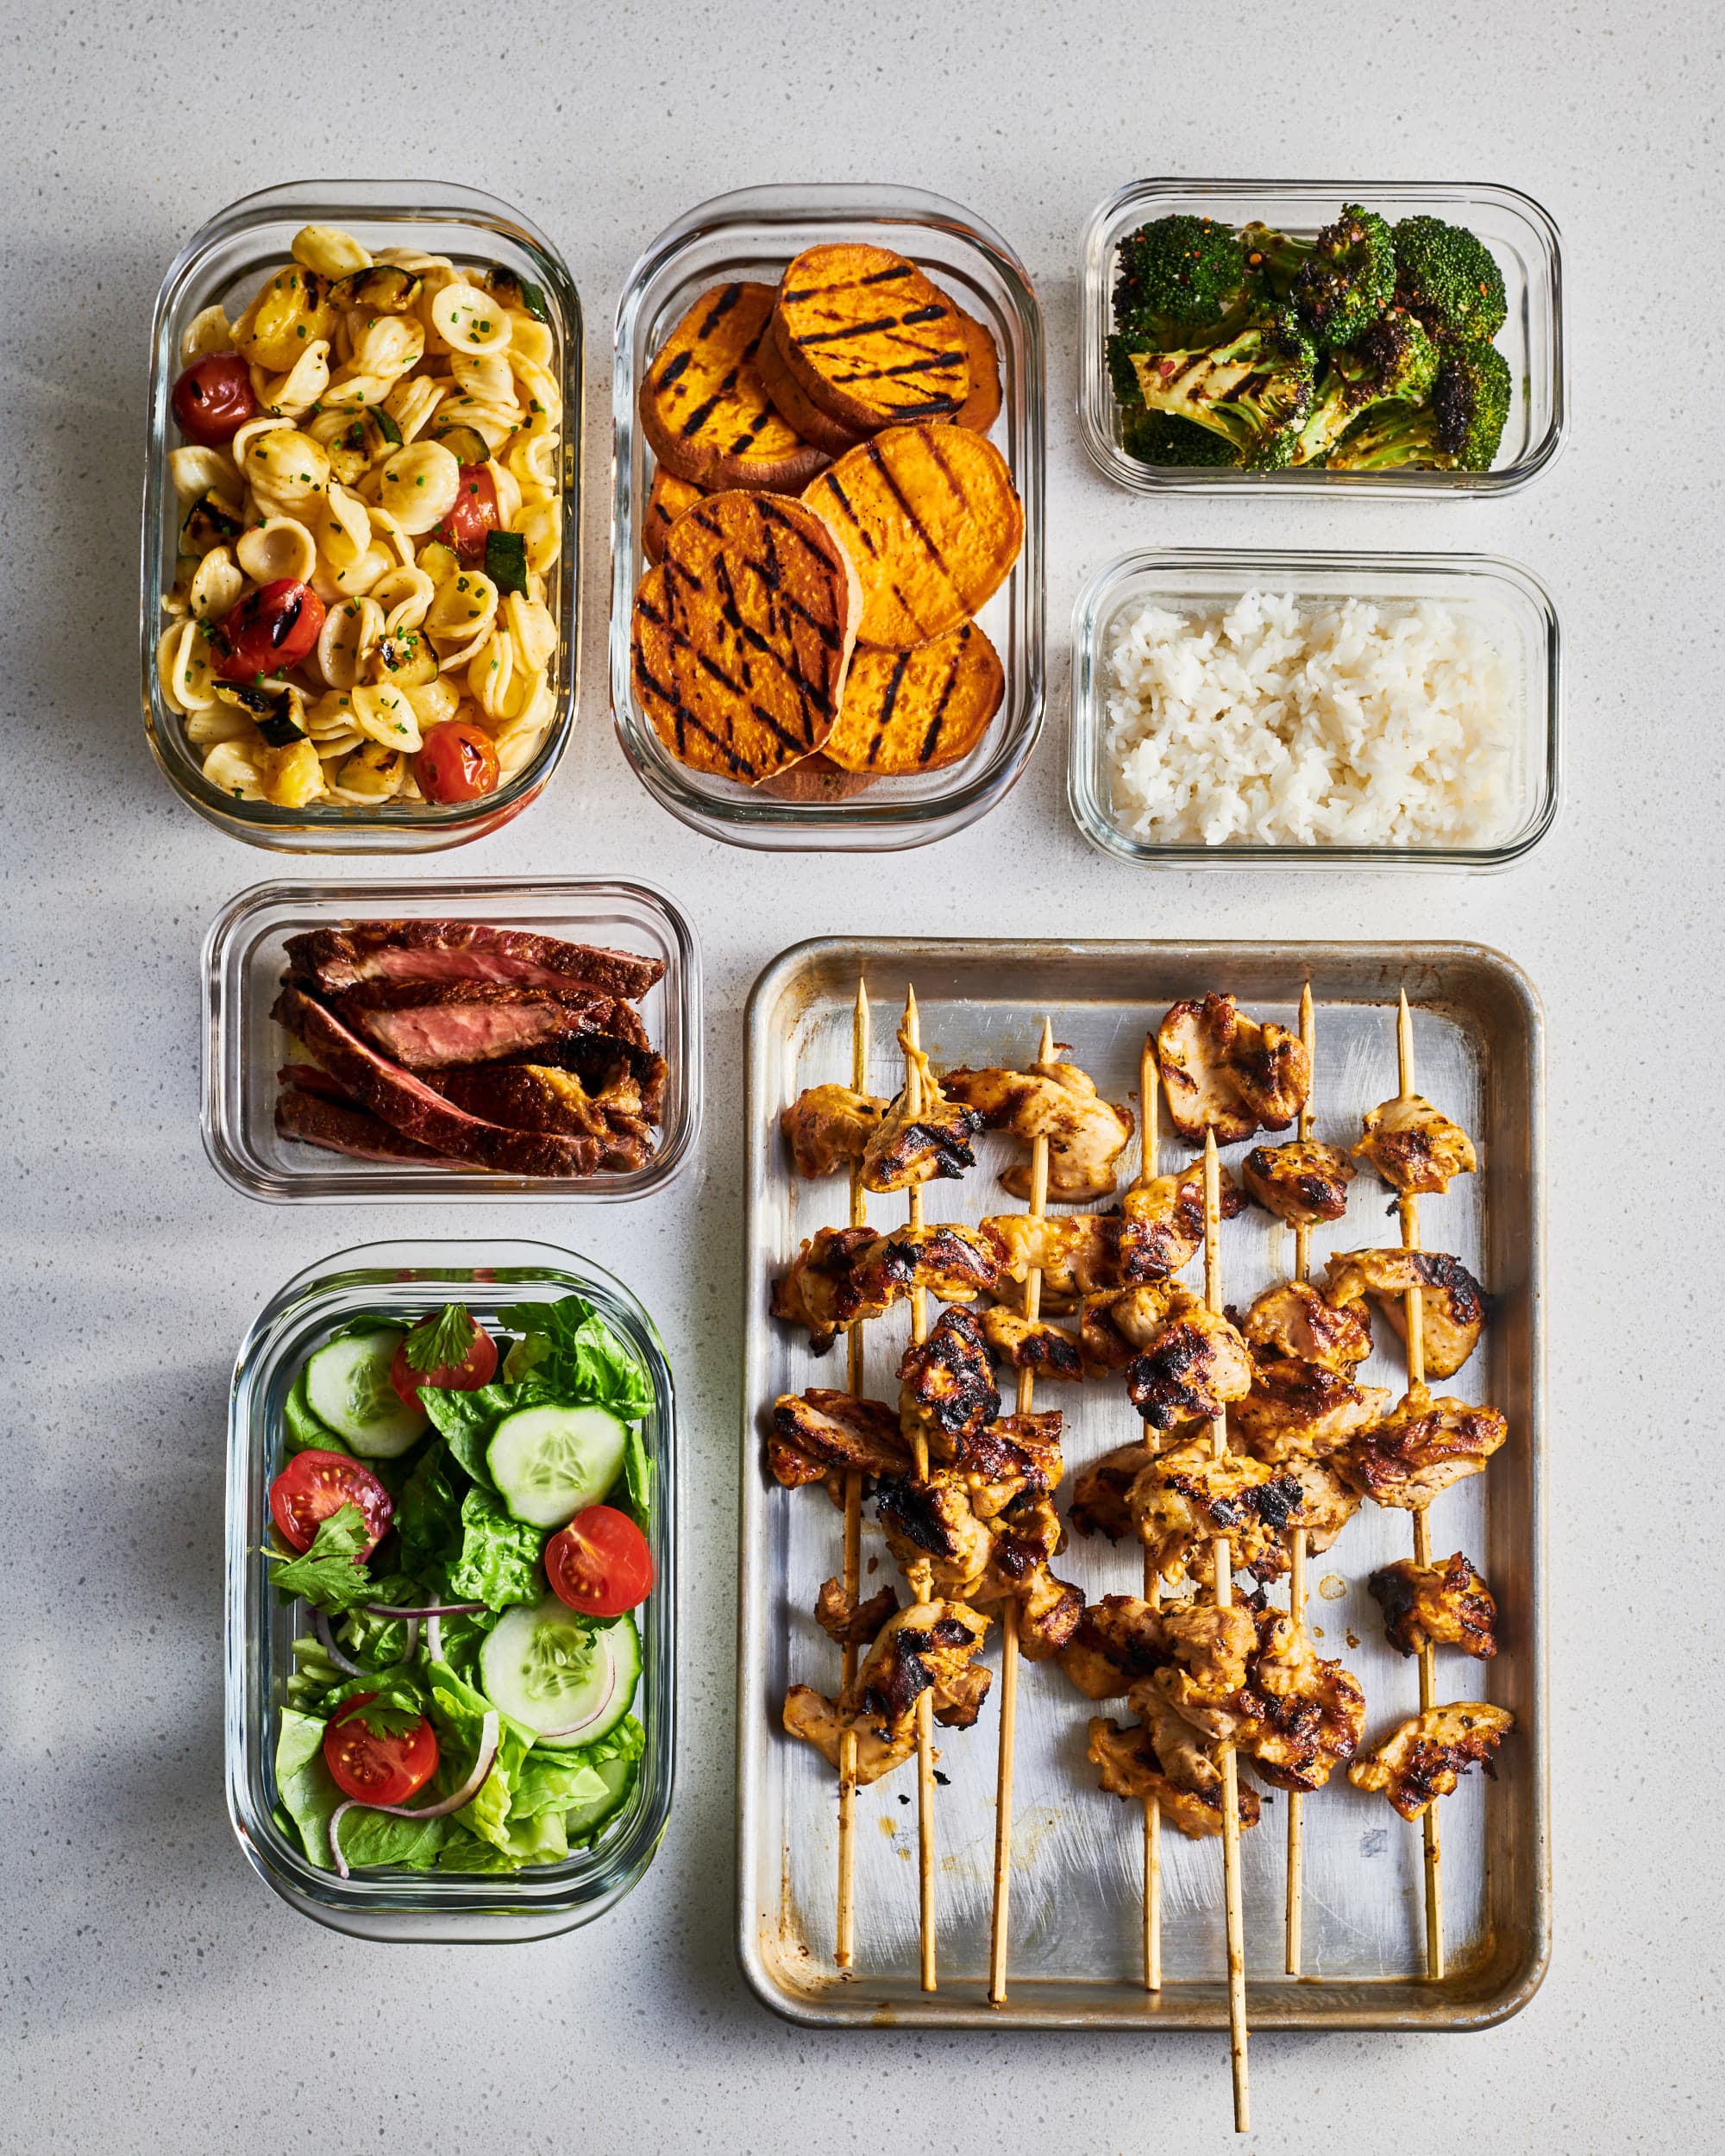 12 Brilliant Meal Prep Ideas to Free Up Your Time